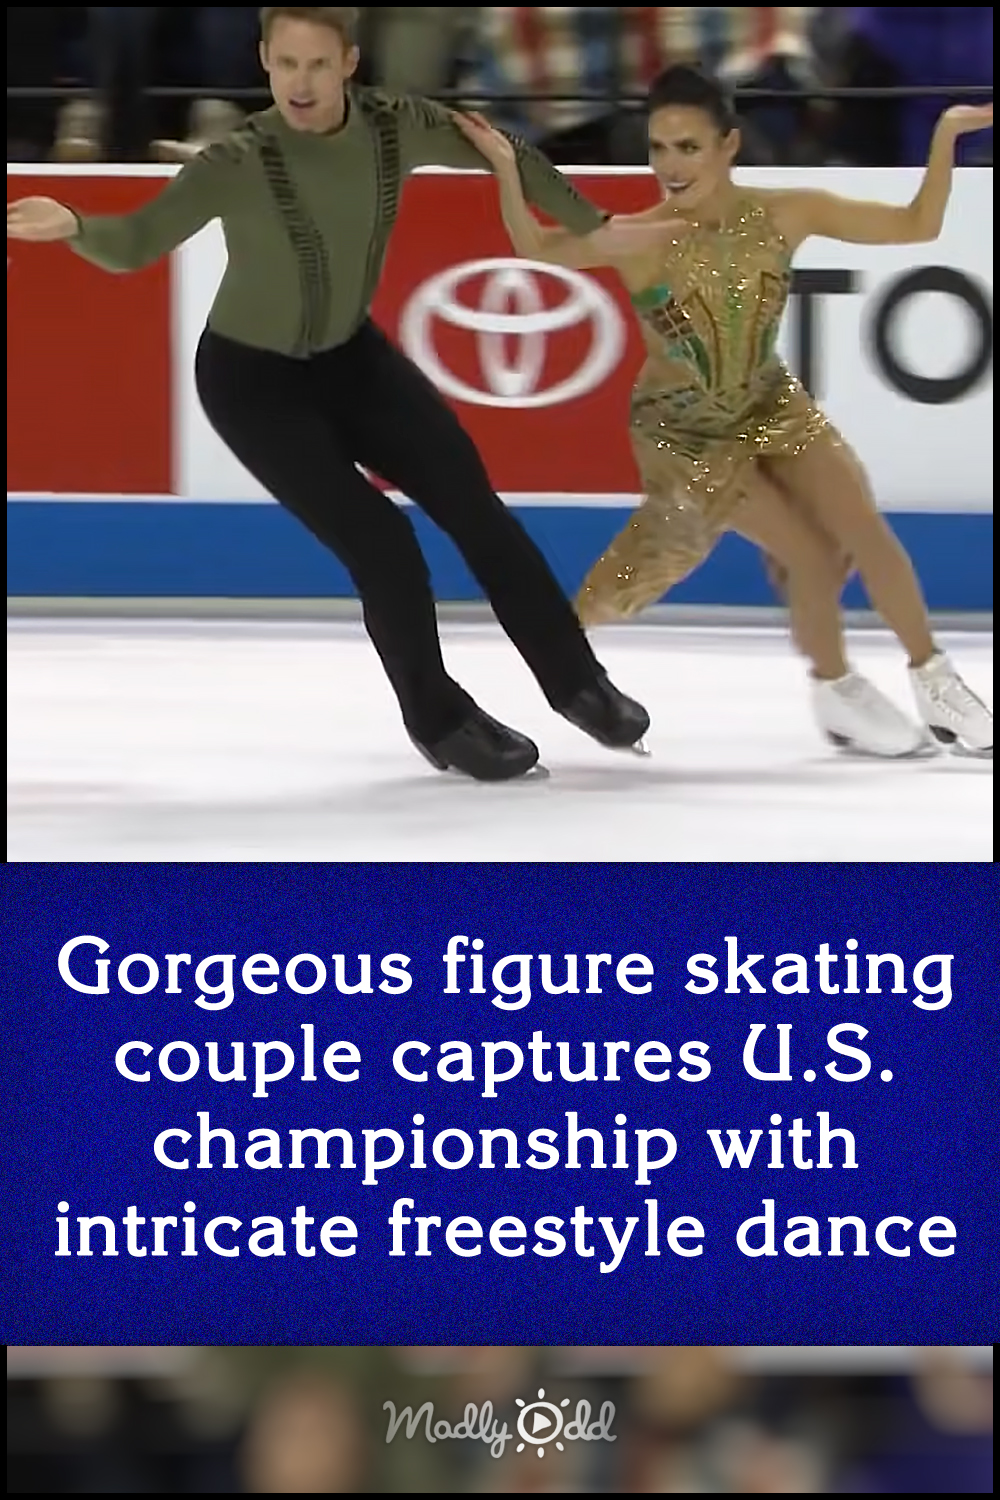 Gorgeous figure skating couple captures U.S. championship with intricate freestyle dance